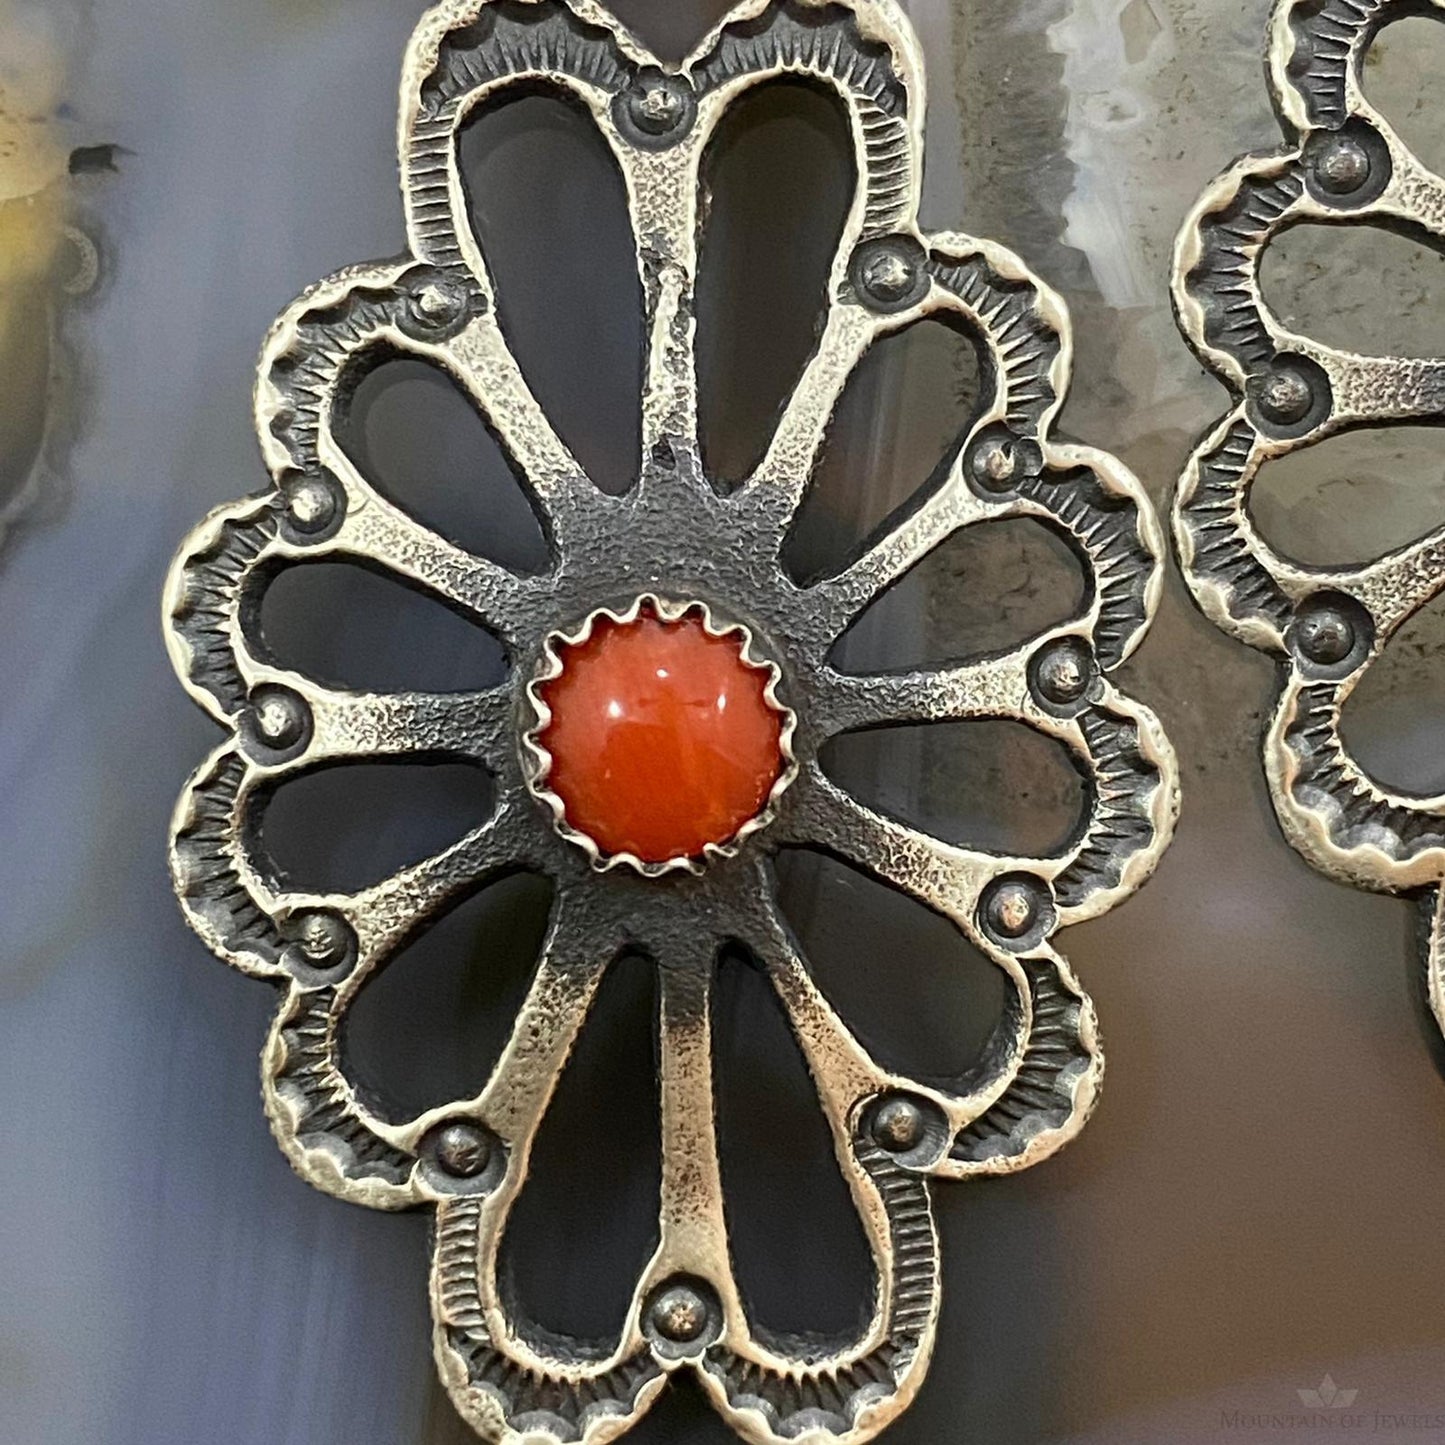 Kevin Billah Native American Sterling Coral Flower Decorated Dangle Earrings For Women #1